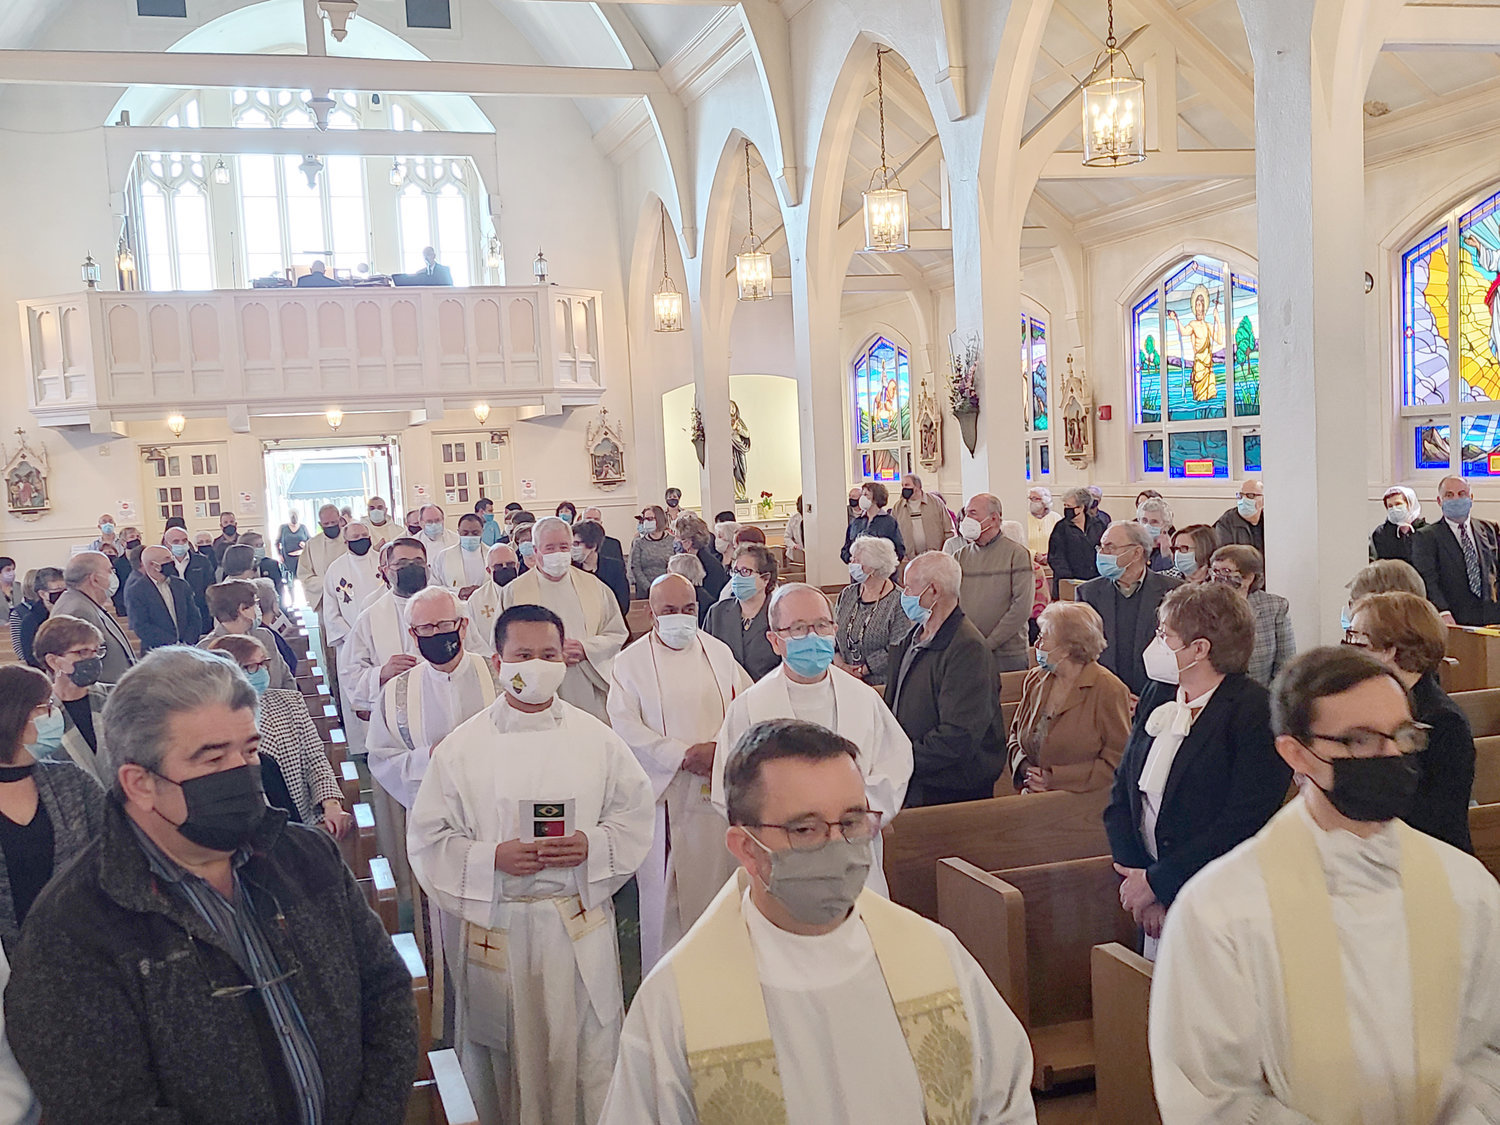 Priests process into St. Elizabeth Church for the Memorial Mass in honor of the church’s late pastor Father Marinaldo Batista, who died from COVID-19 complications in his native Brazil on April 1, Holy Thursday.